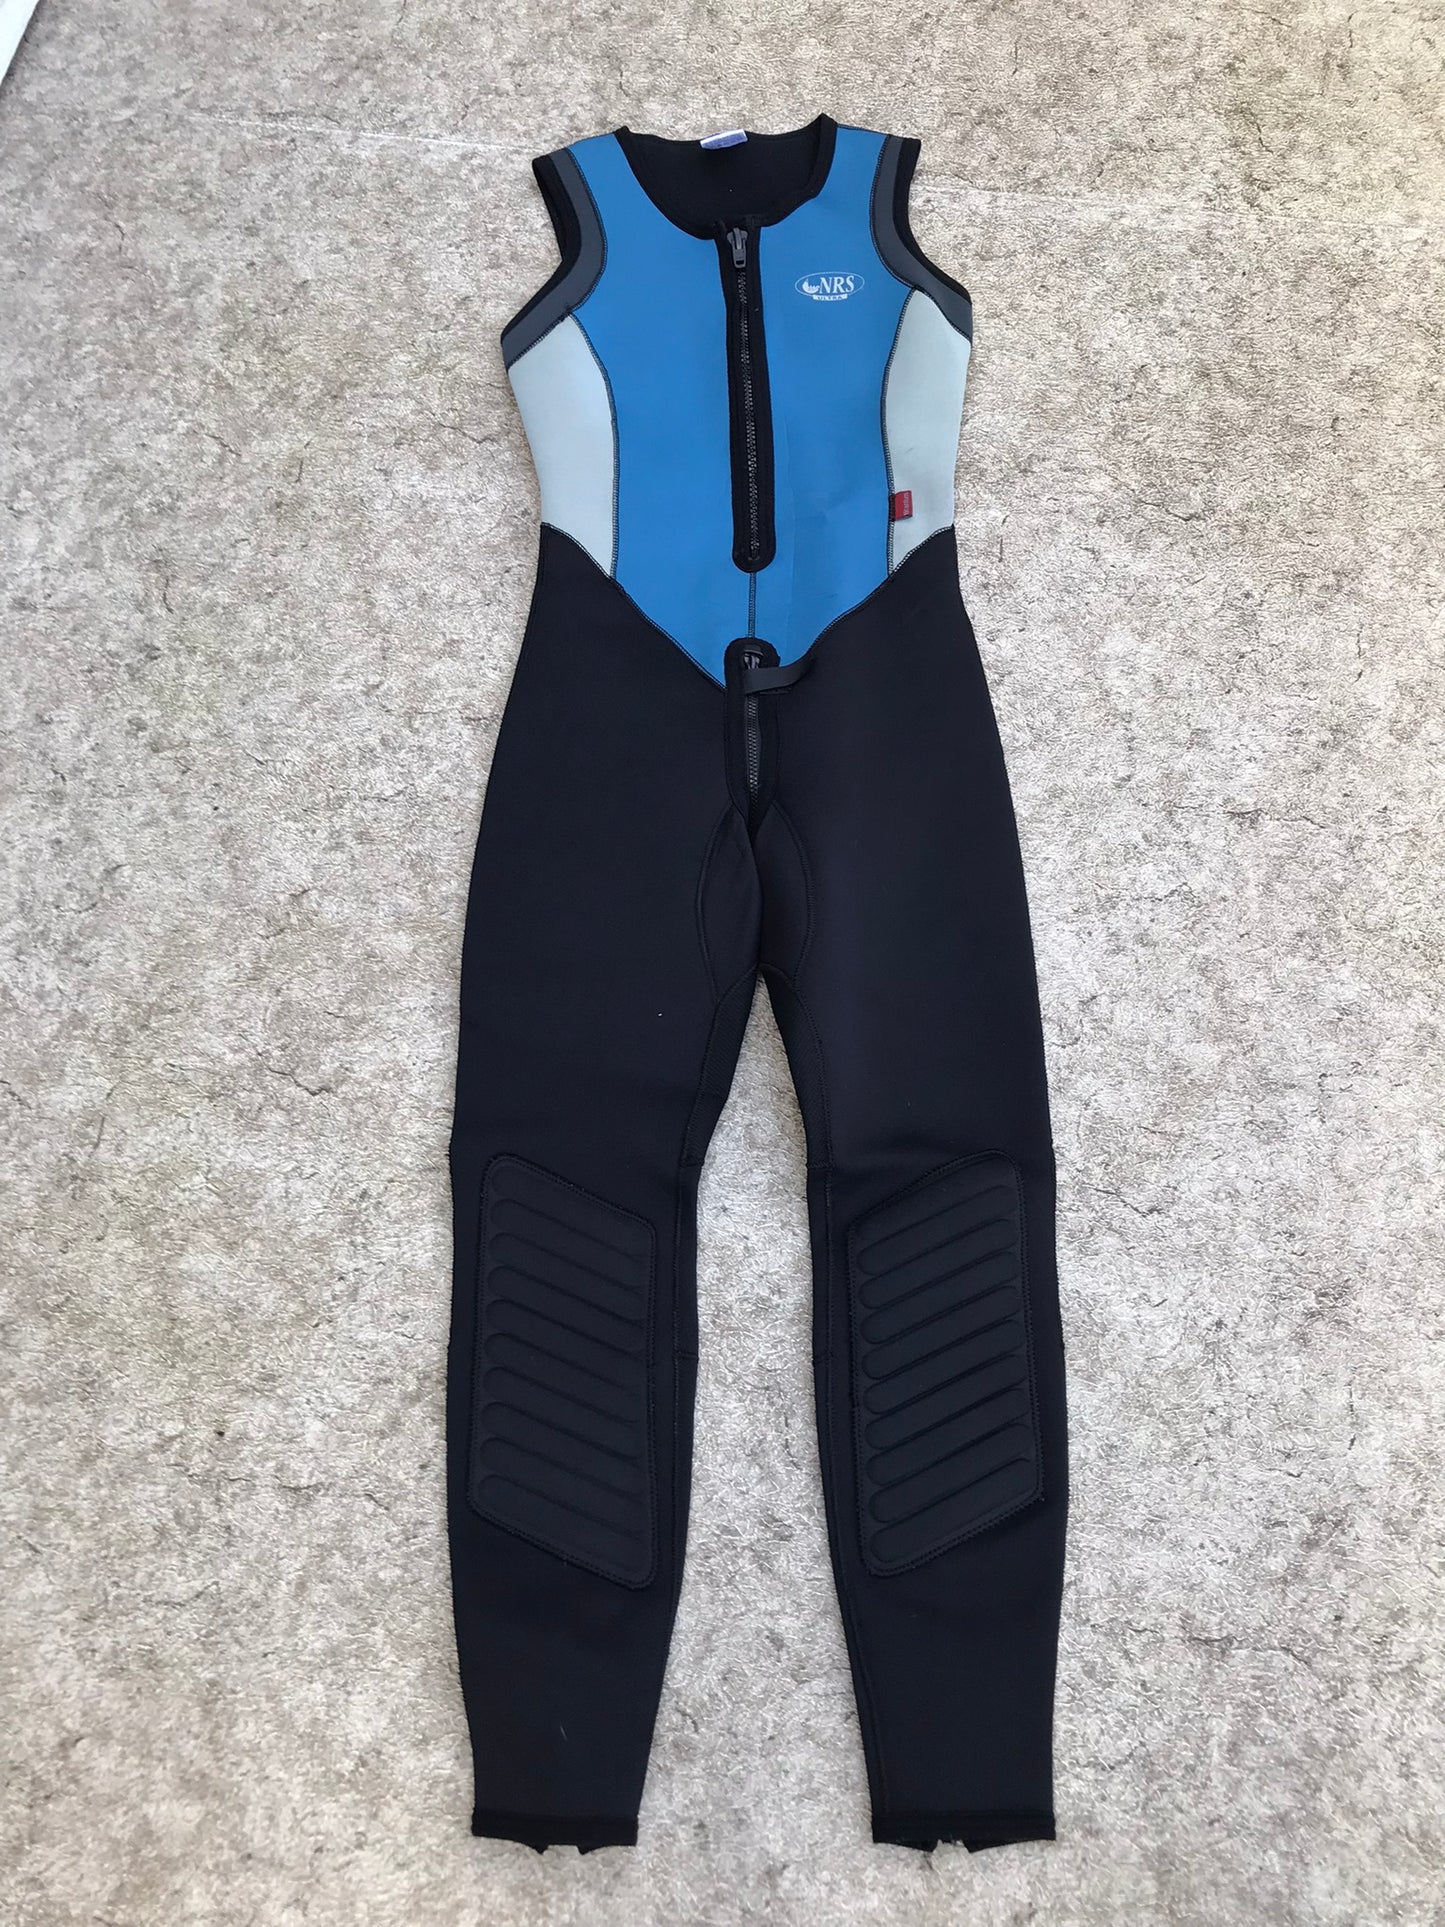 Wetsuit Ladies Size Large Full John NRS Sports 2-3 mm Black Blue With Crotch Zip Out Excellent